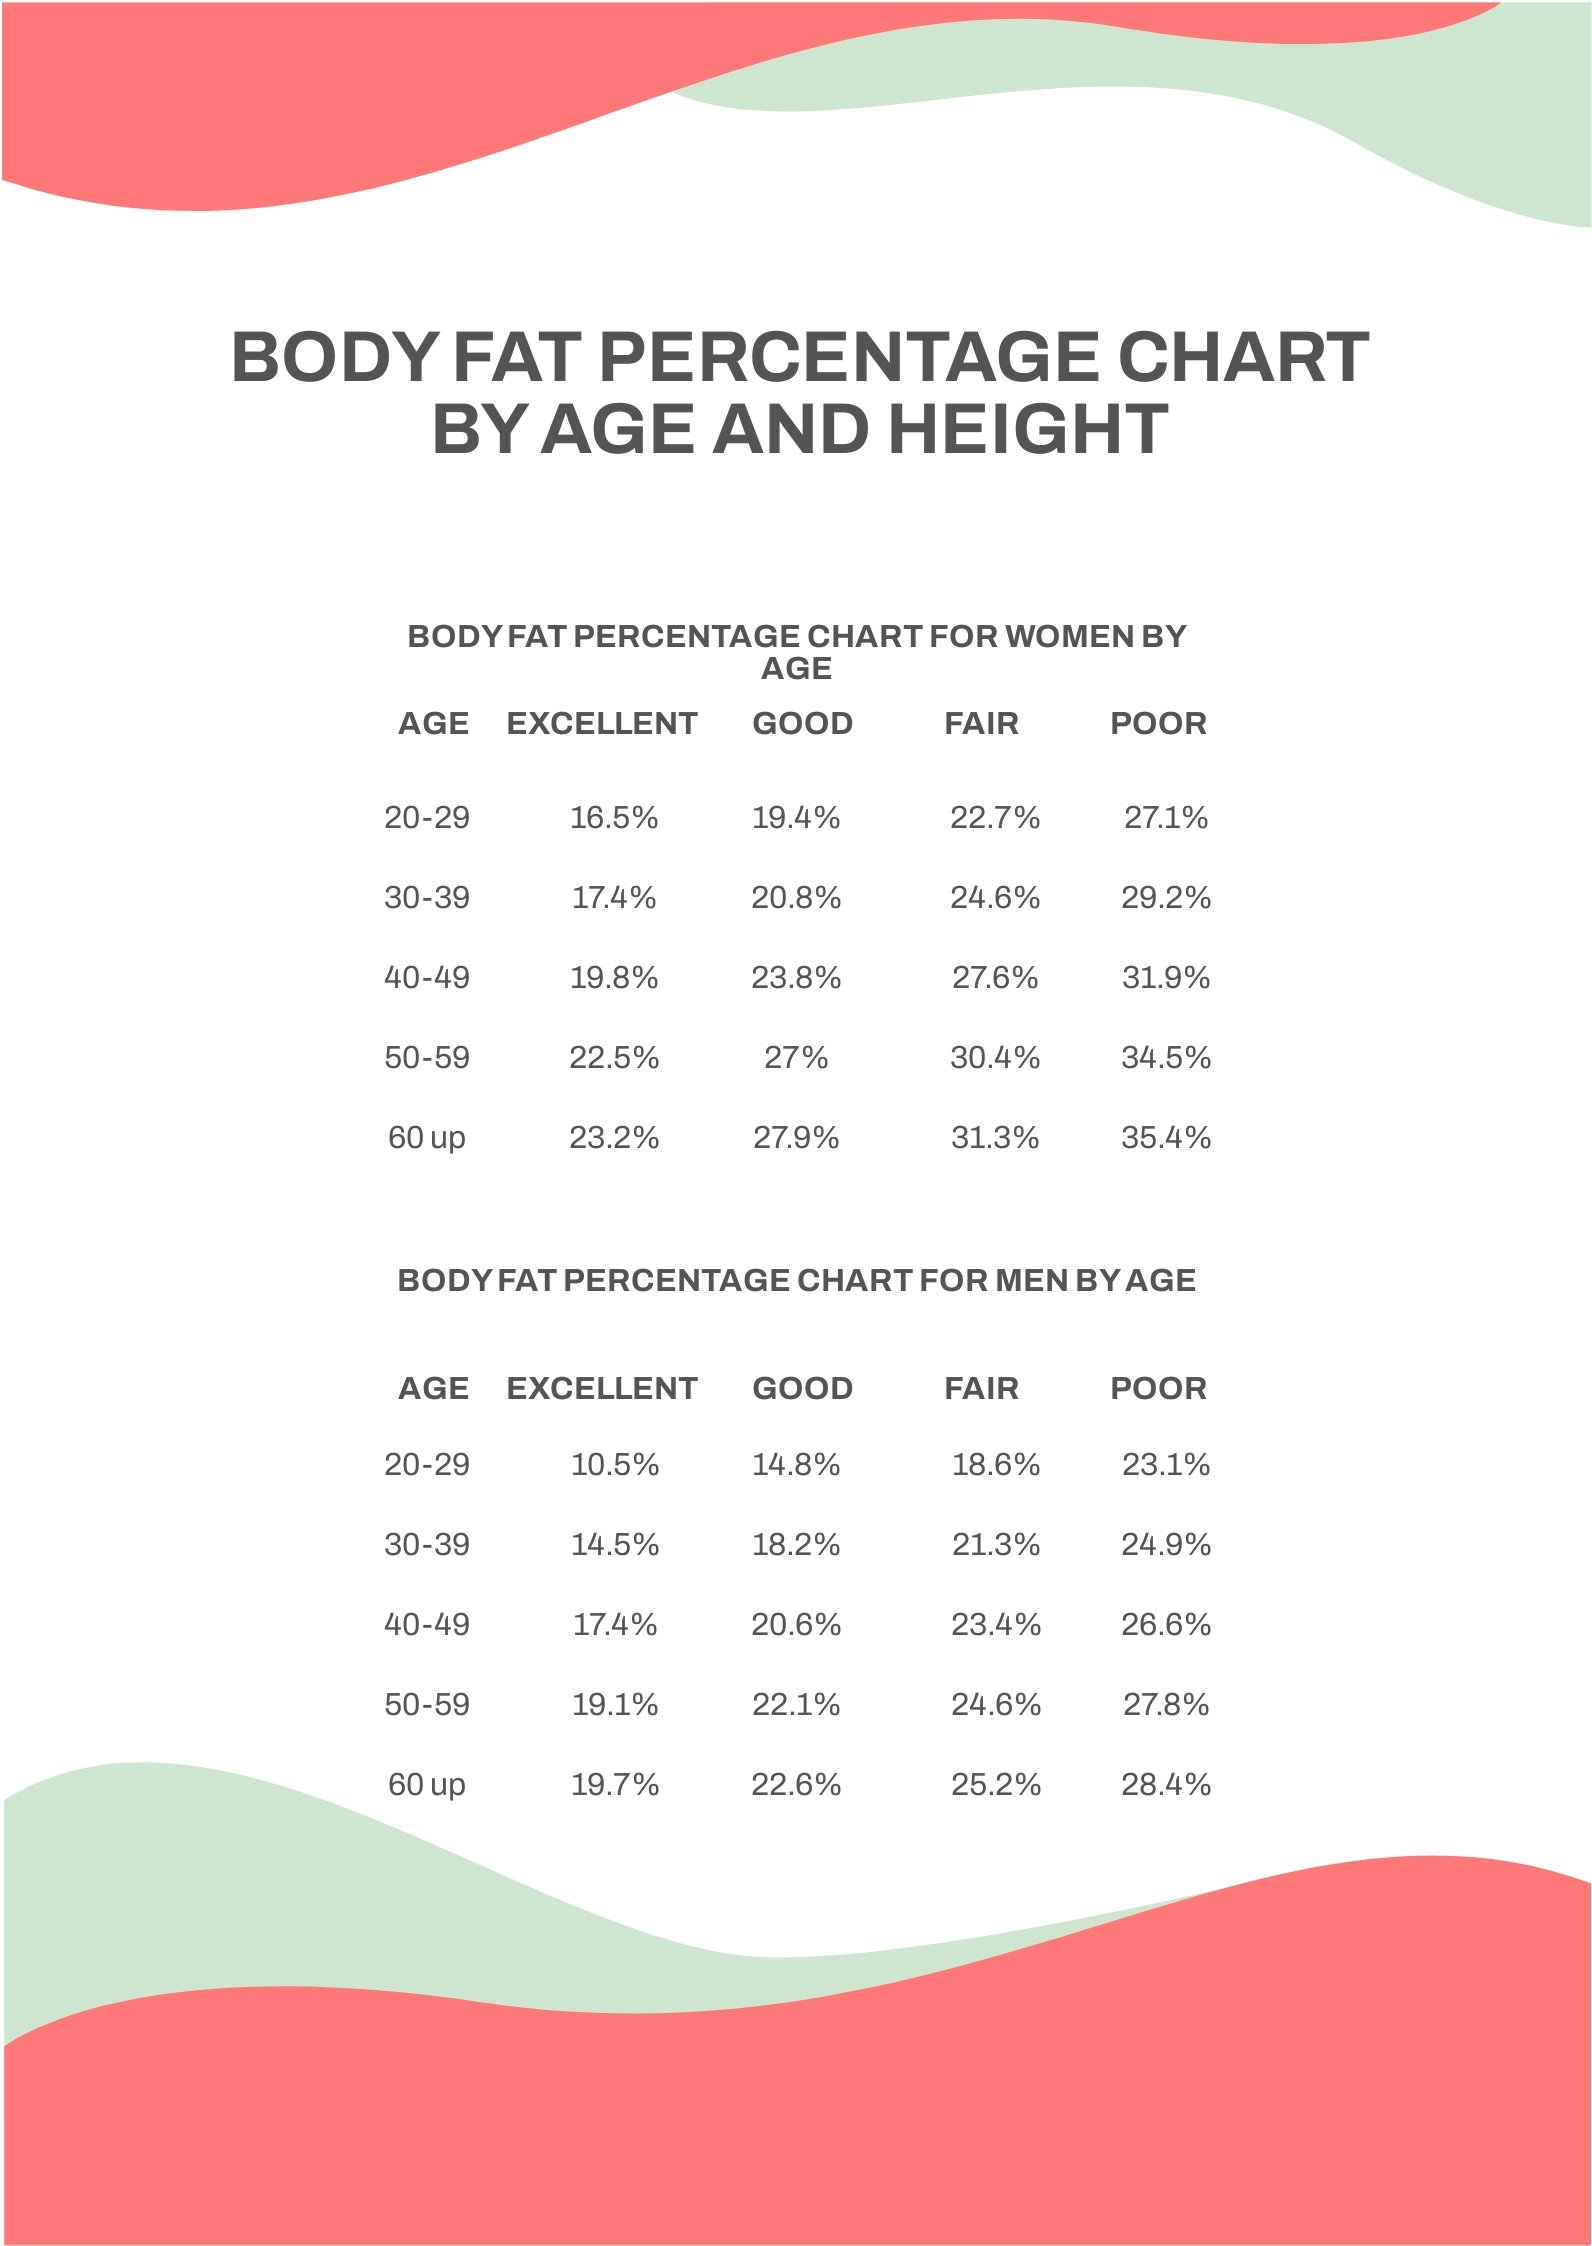 Body Fat Percentage Chart By Age And Height in PDF